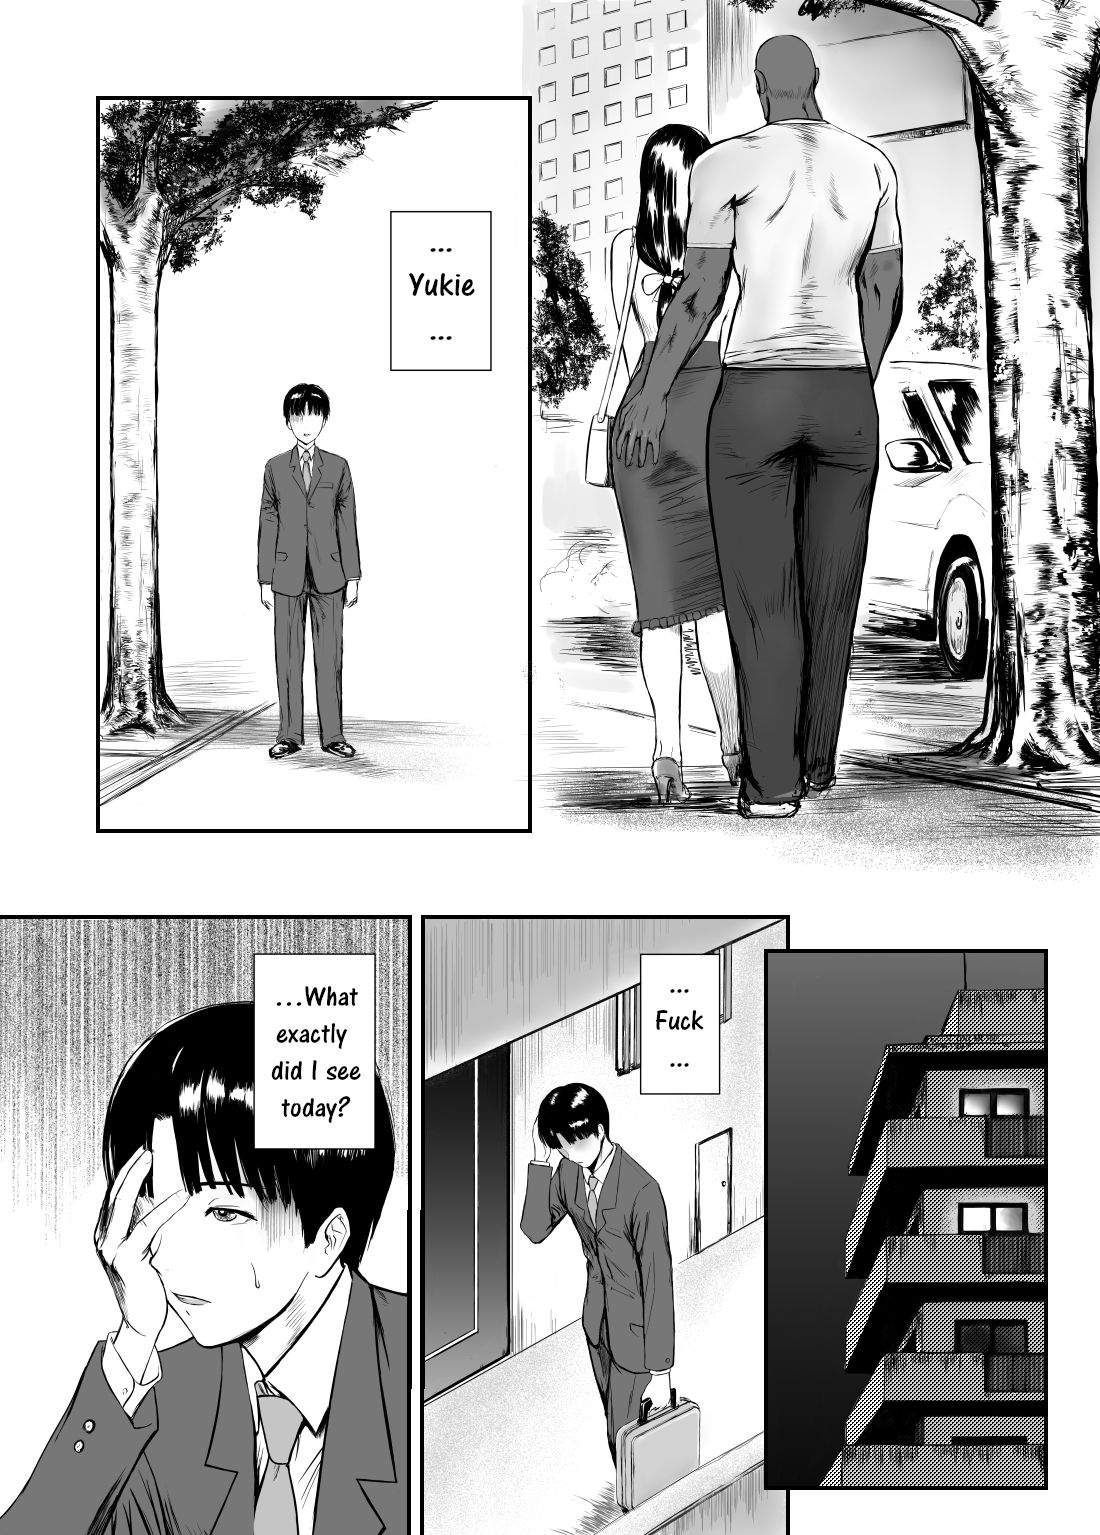 [KRT] Fade to Black [English] page 5 full